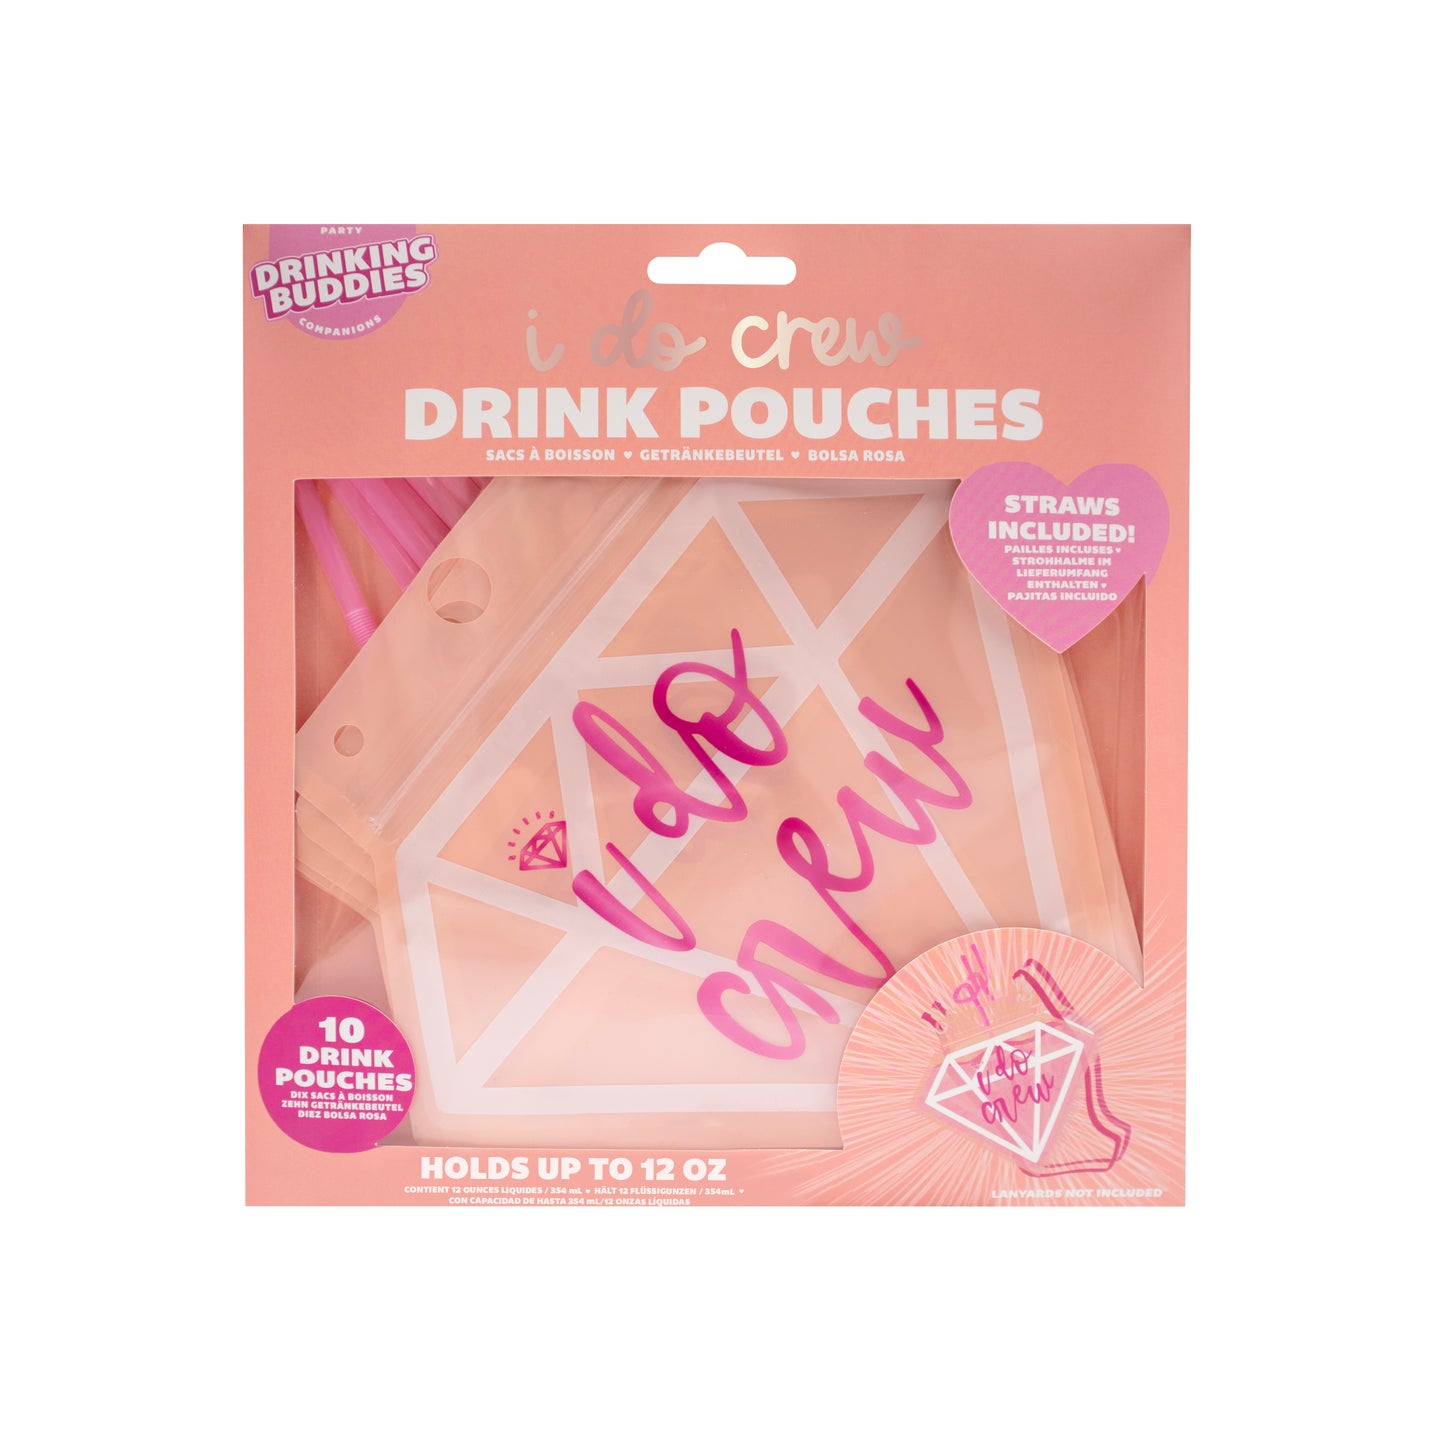 I do Crew Drink Pouches-10 Pack